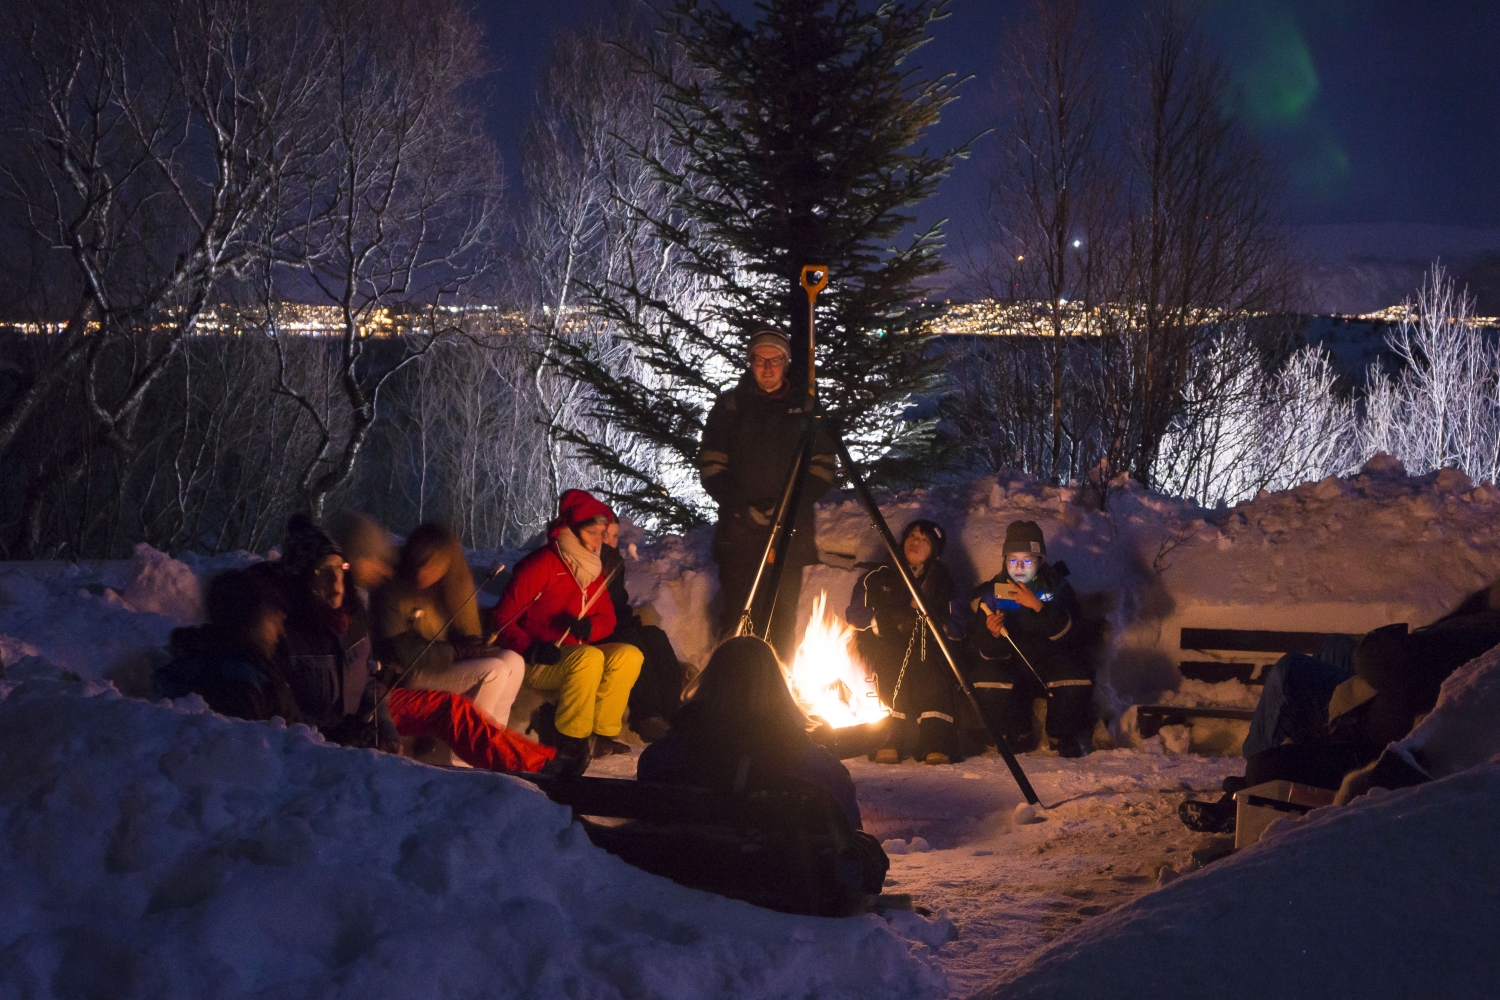 Guests gathered around the bonfire in snowy landscape